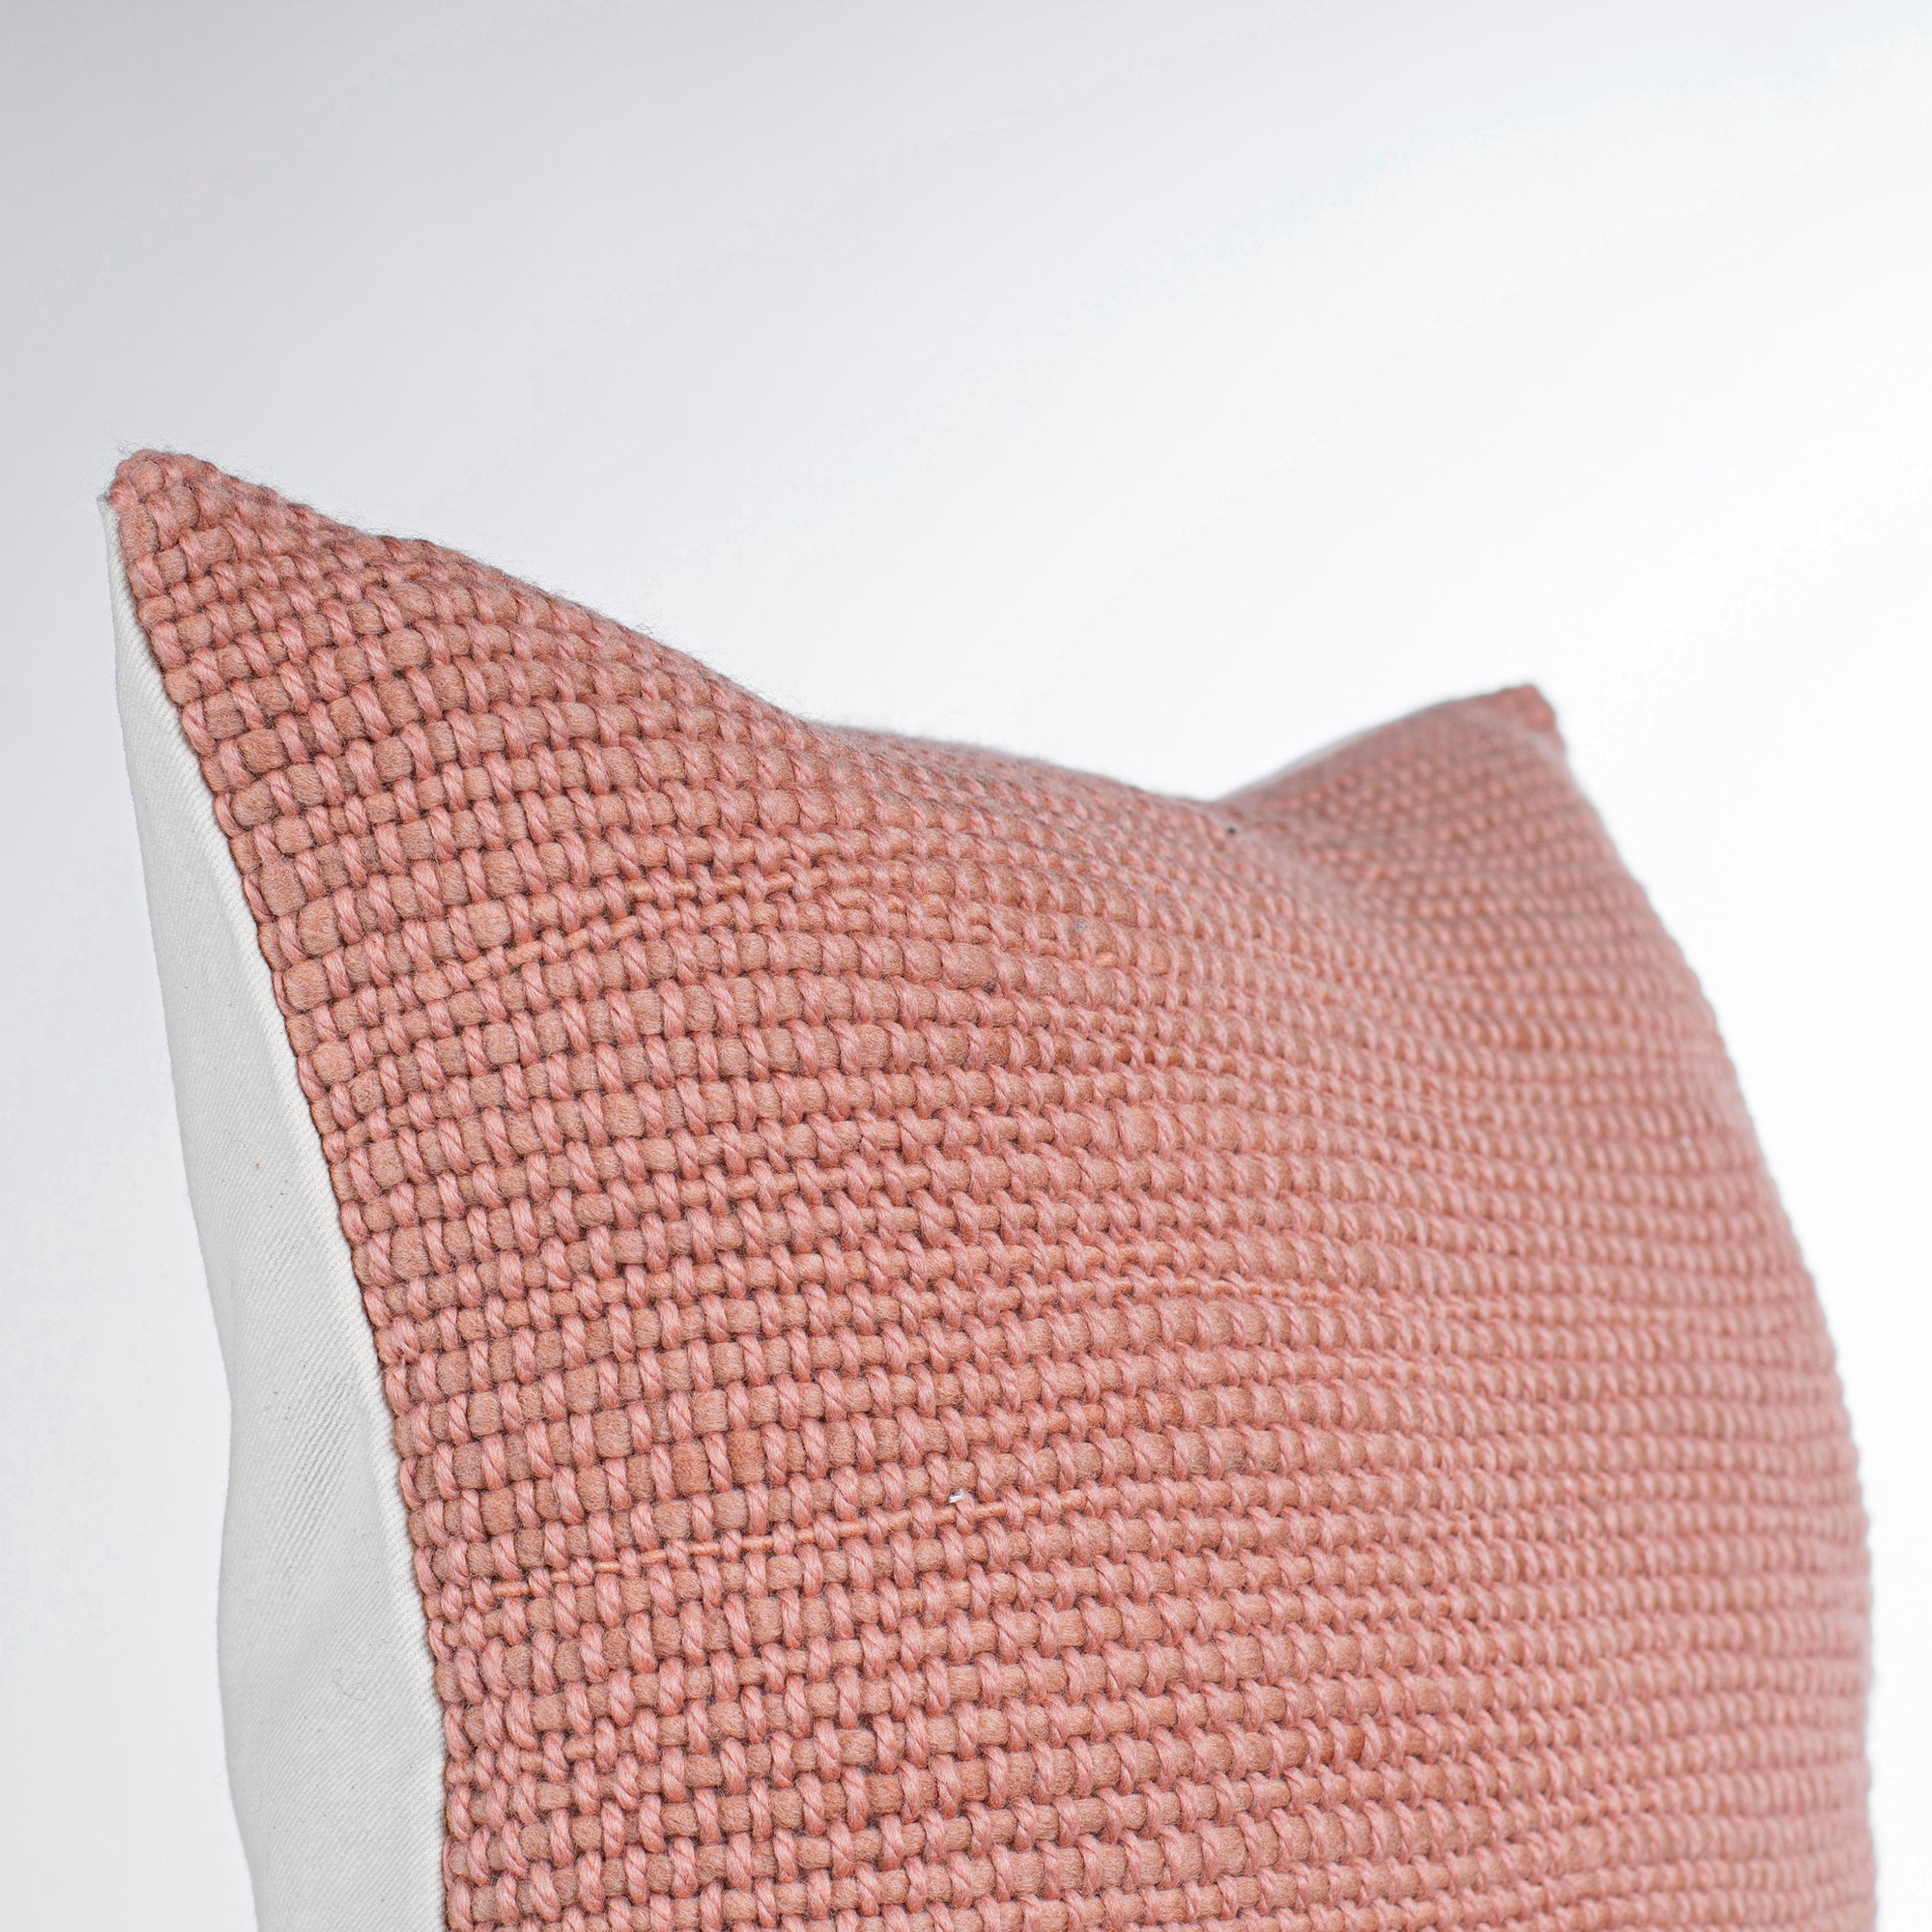 Couch Cushion Cover in Handwoven Dusty Rose Wool Niebla 18x18